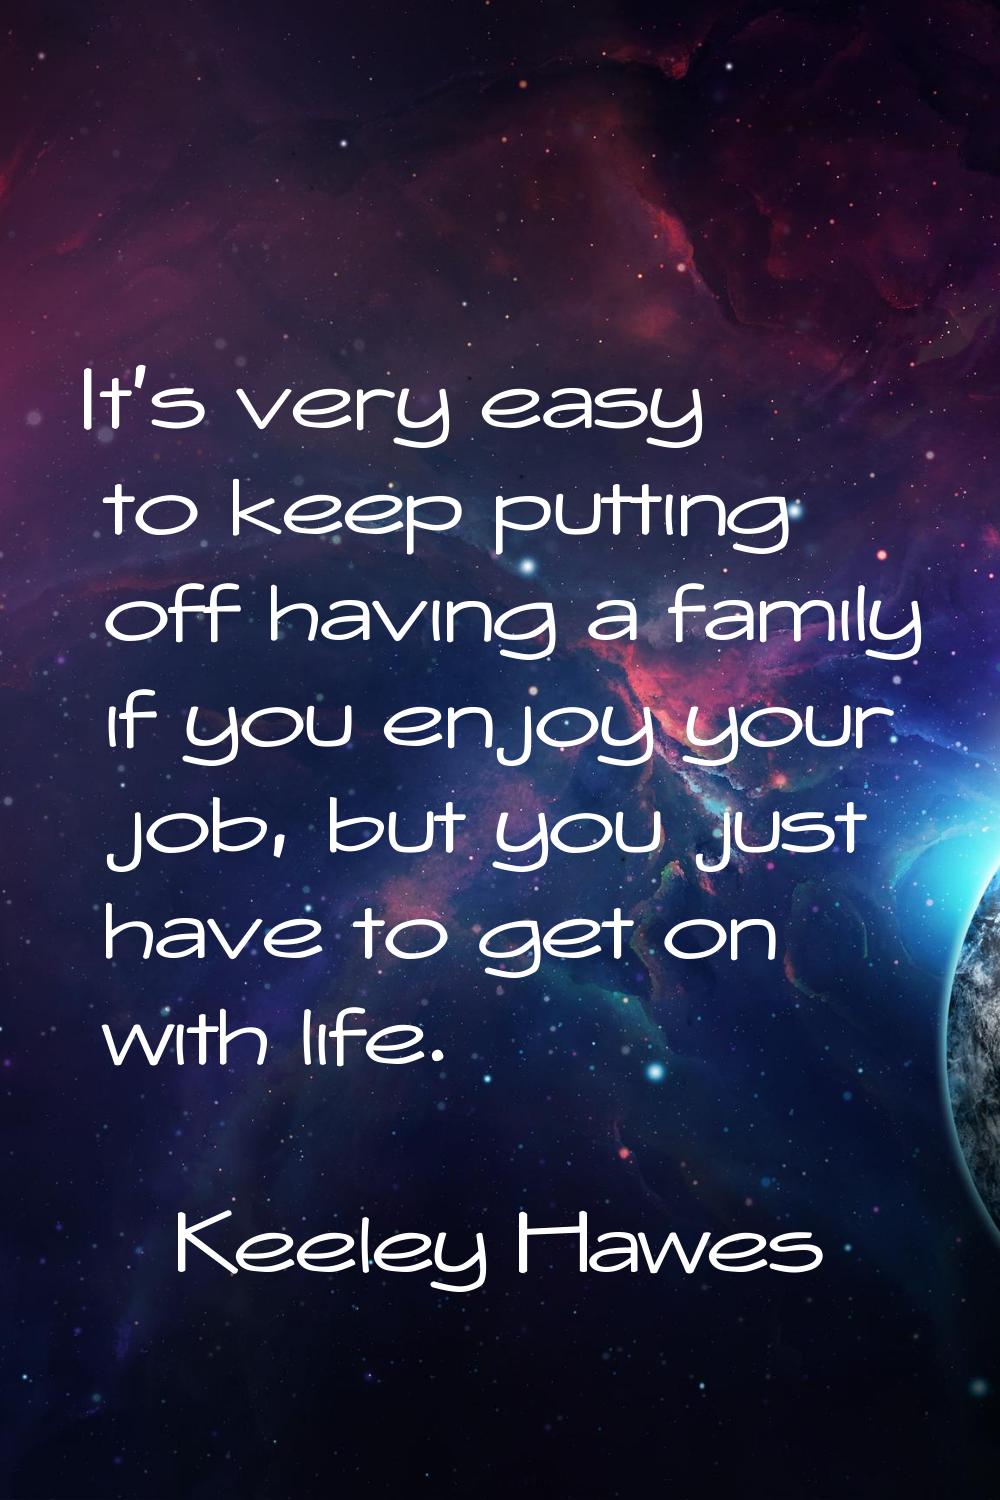 It's very easy to keep putting off having a family if you enjoy your job, but you just have to get 